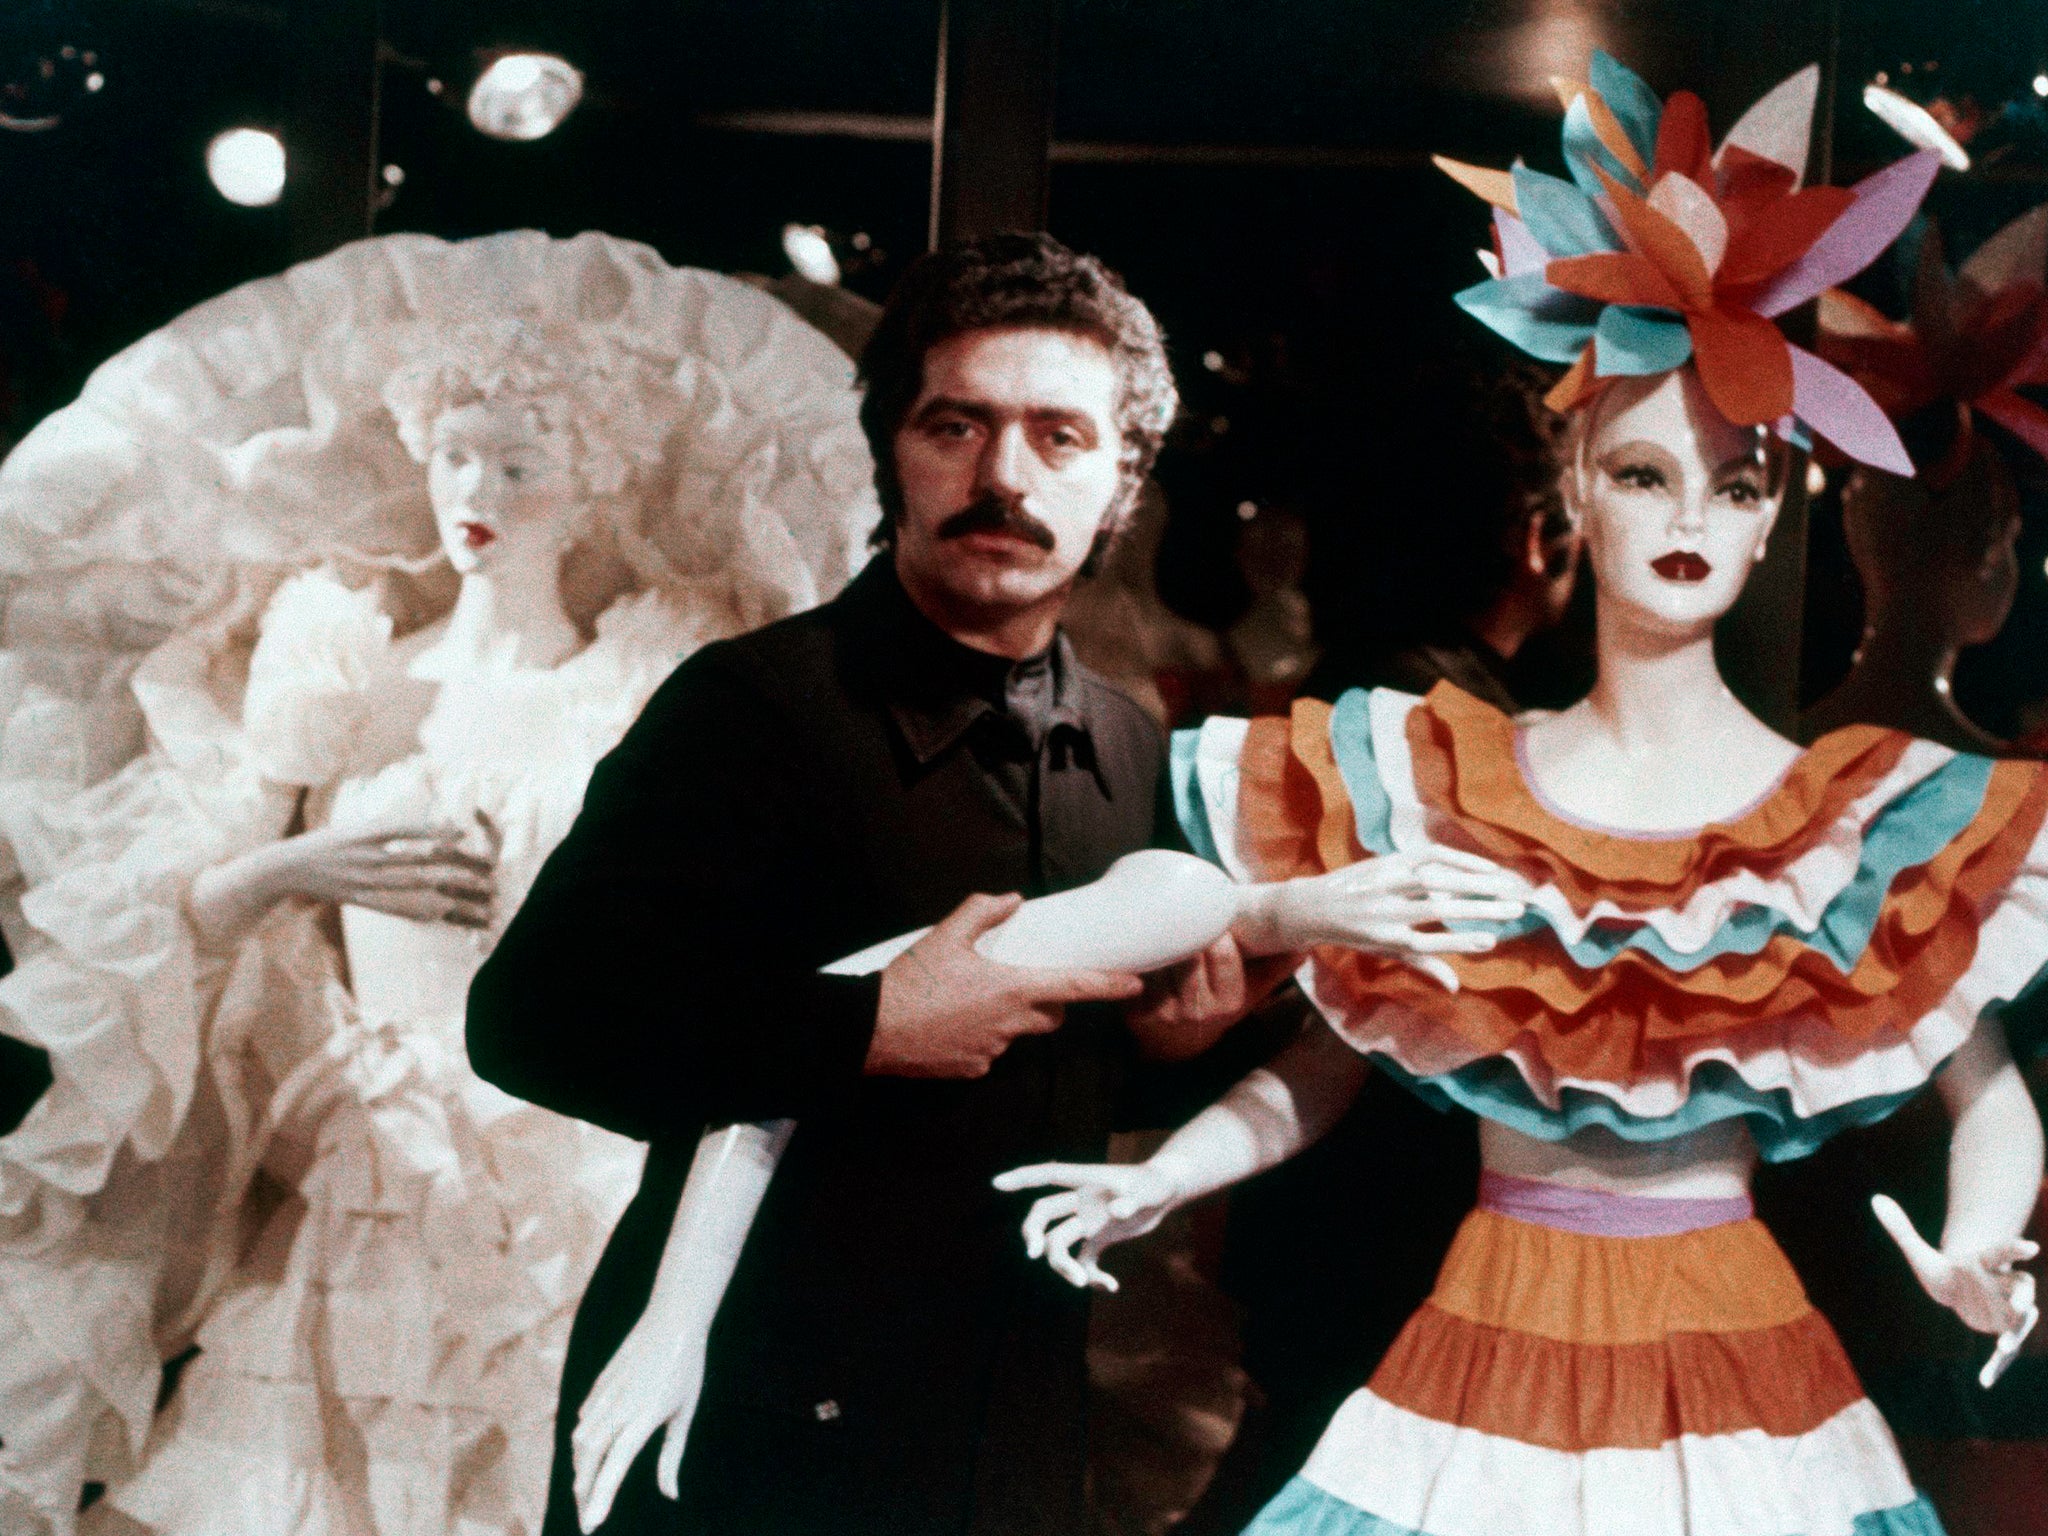 Waxwork mannequins were used by Rabanne for the presentation of his 1973 collection of paper dresses